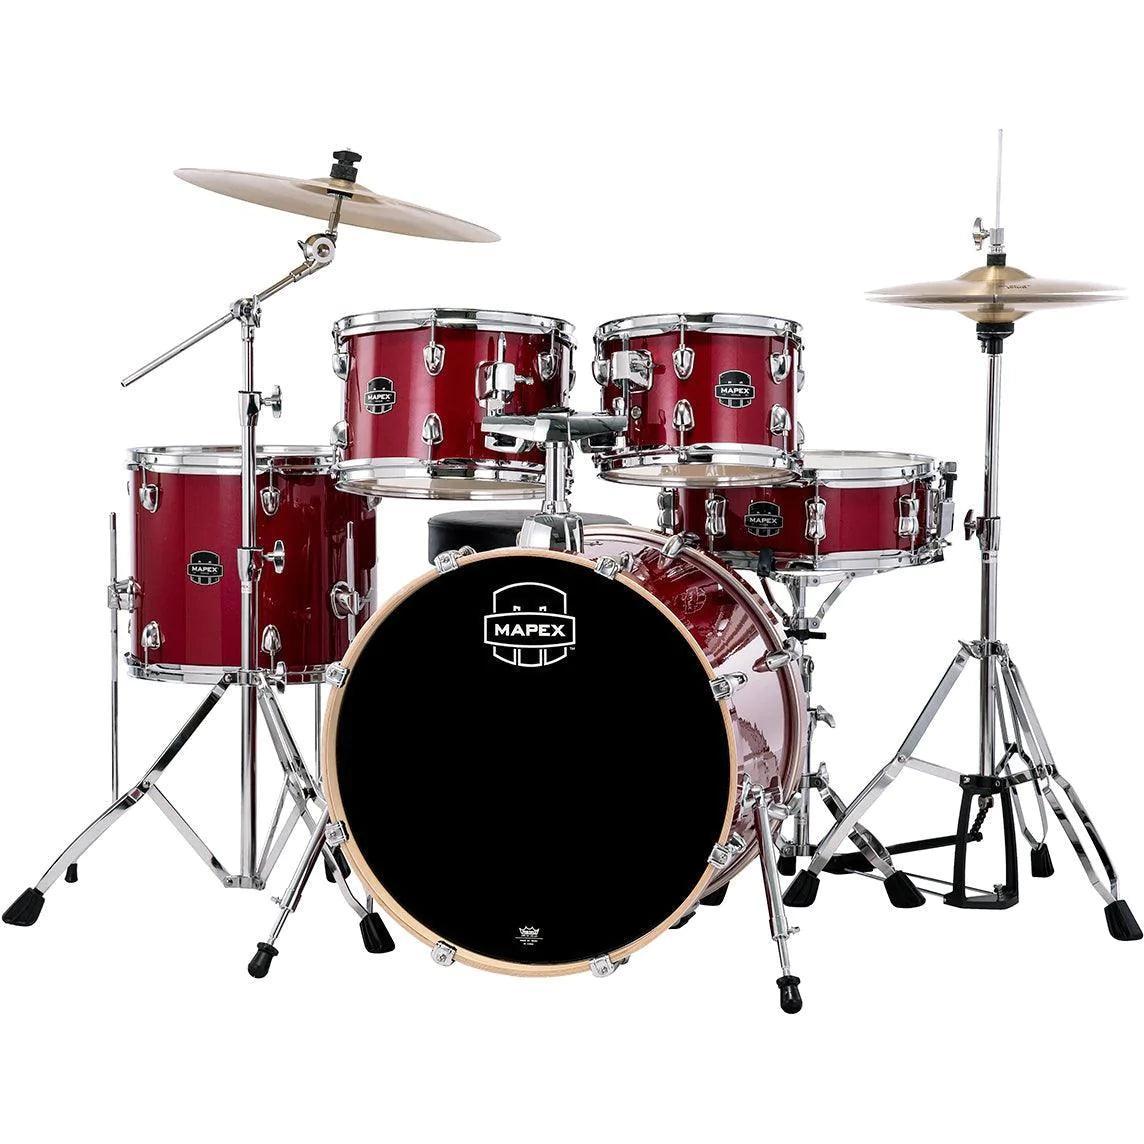 Mapex Drums Venus Fusion 5pc Drum Set with Cymbals & Throne